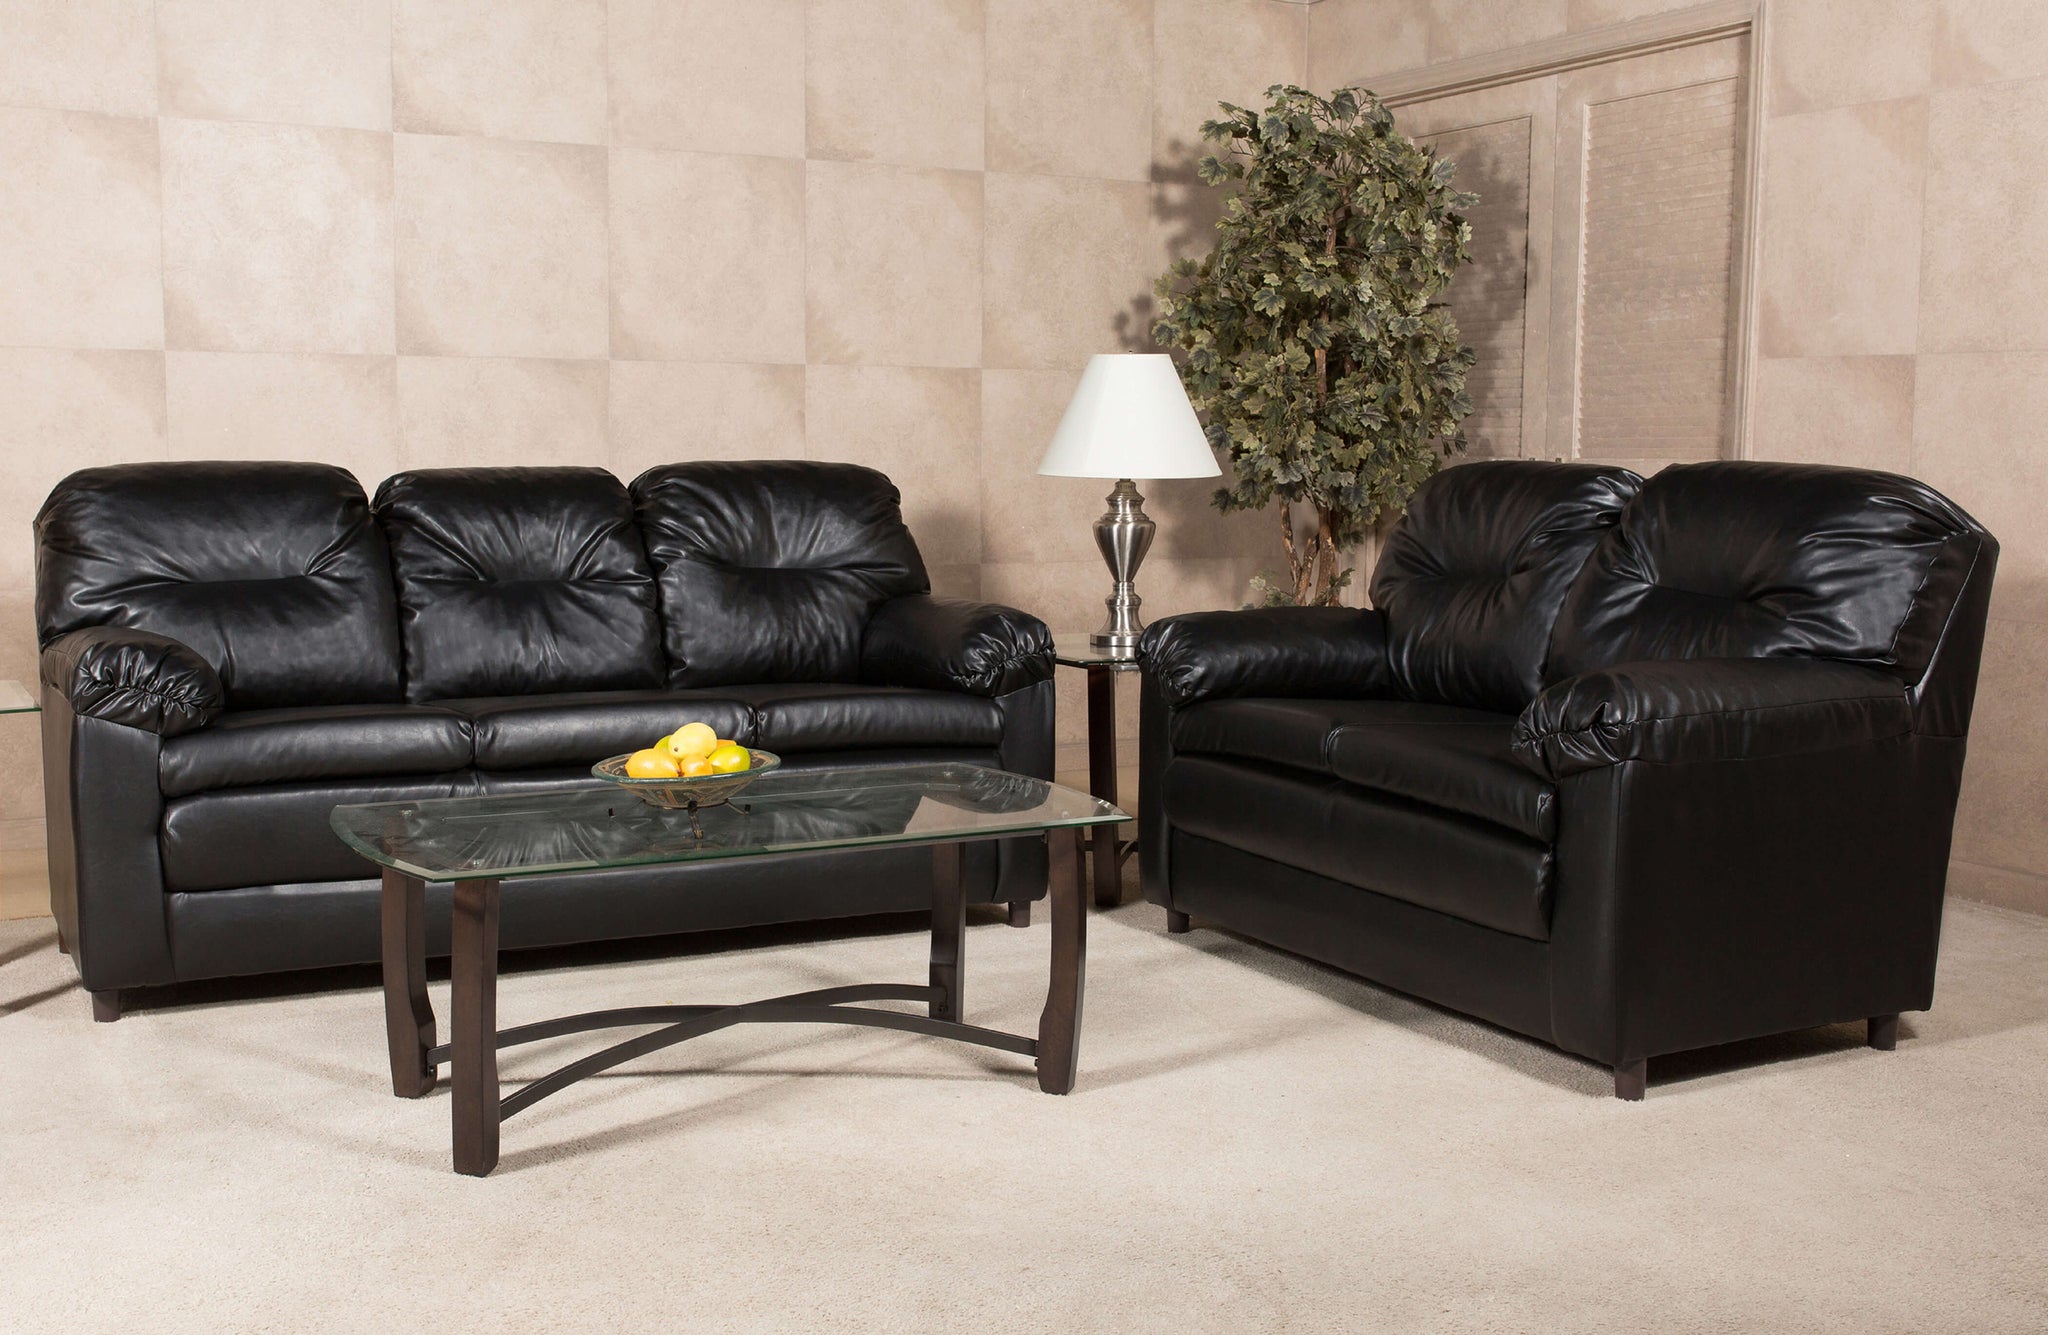 bonded leather sofa meaning